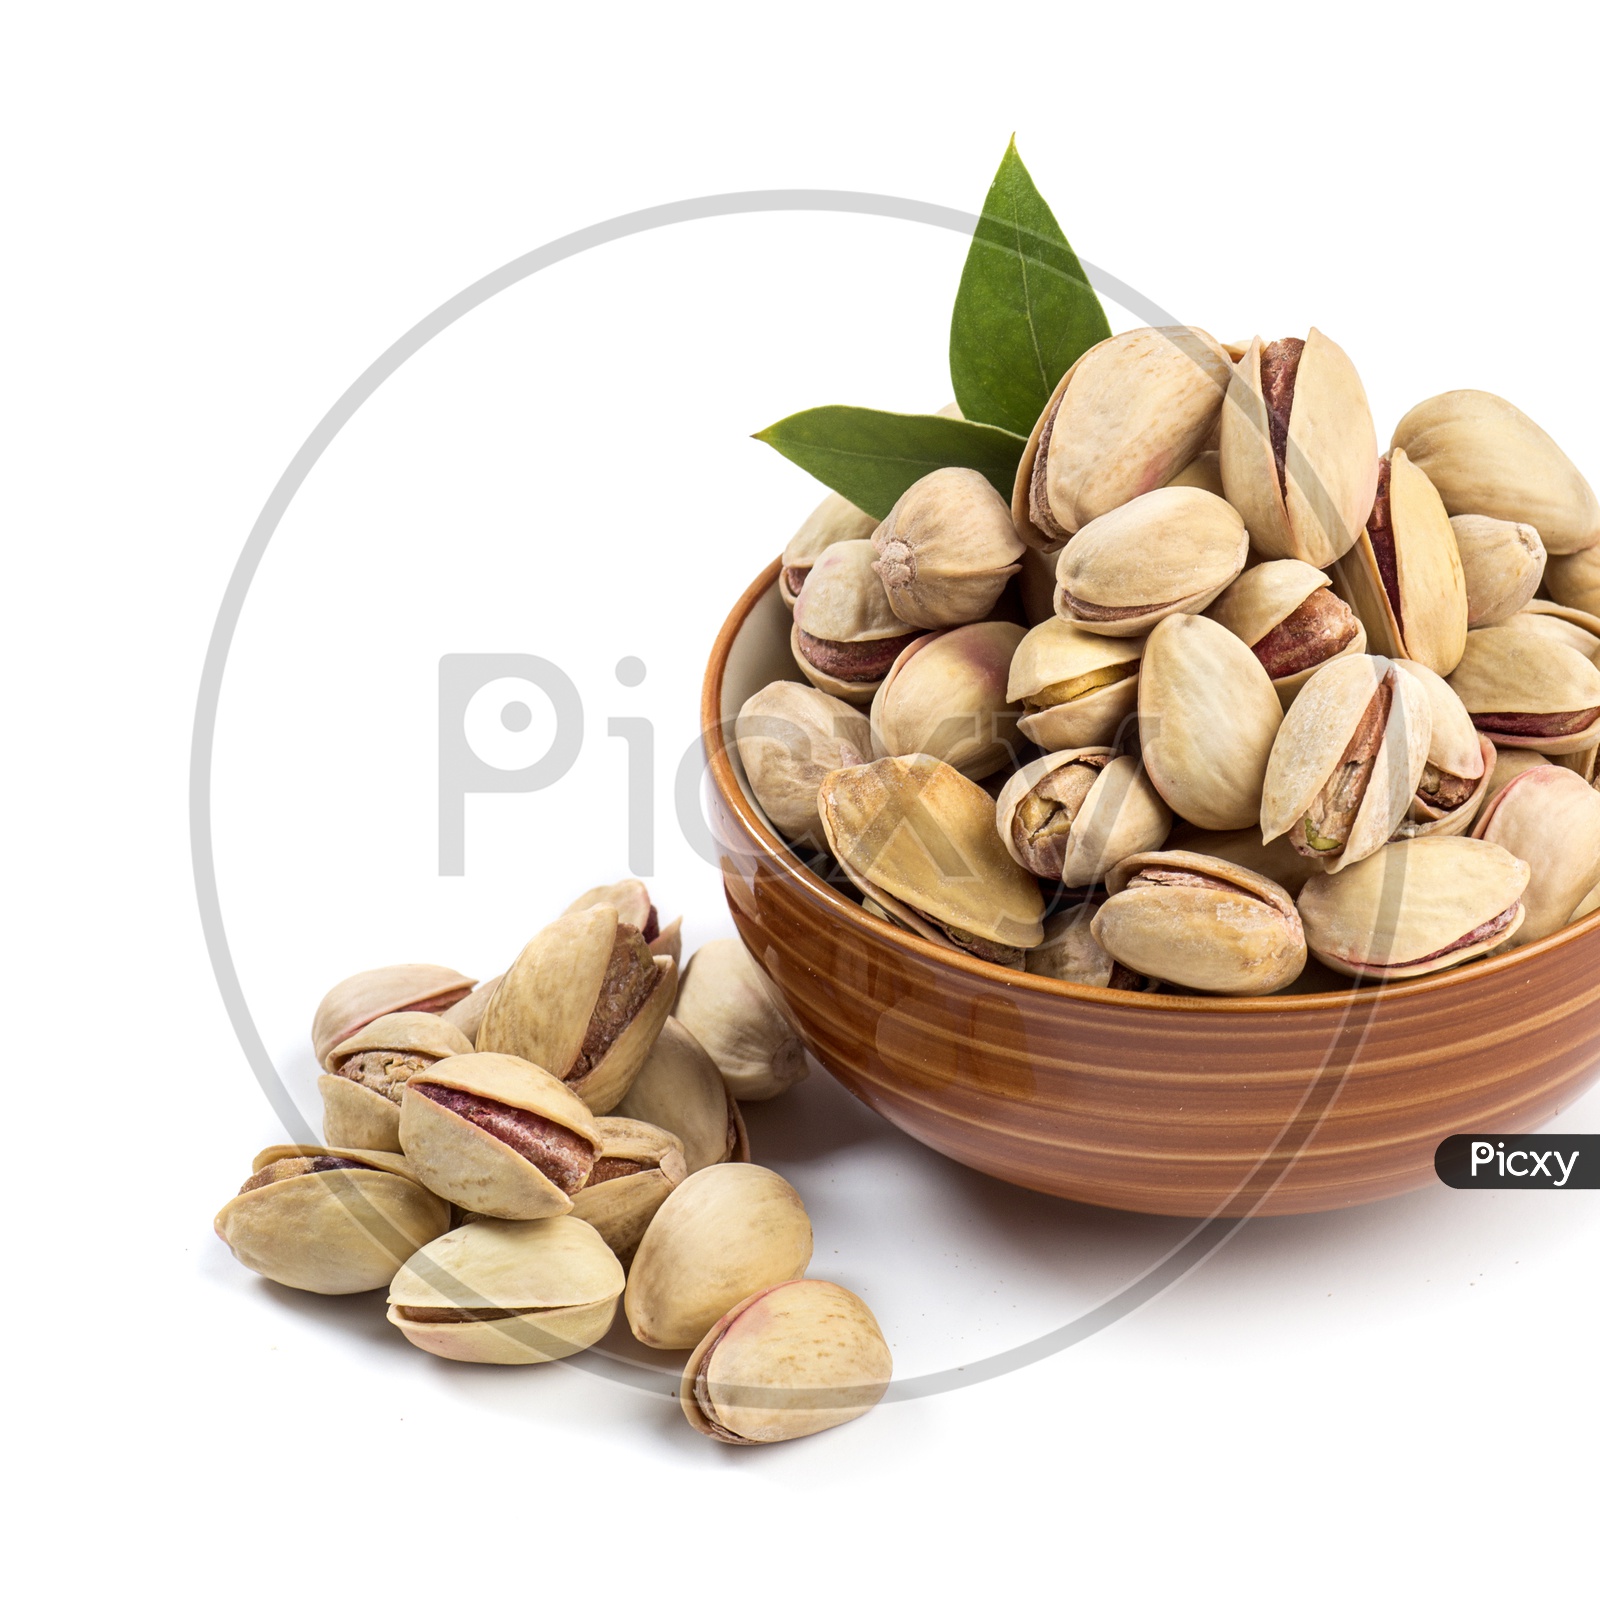 Pistachios in a Bowl on white Background